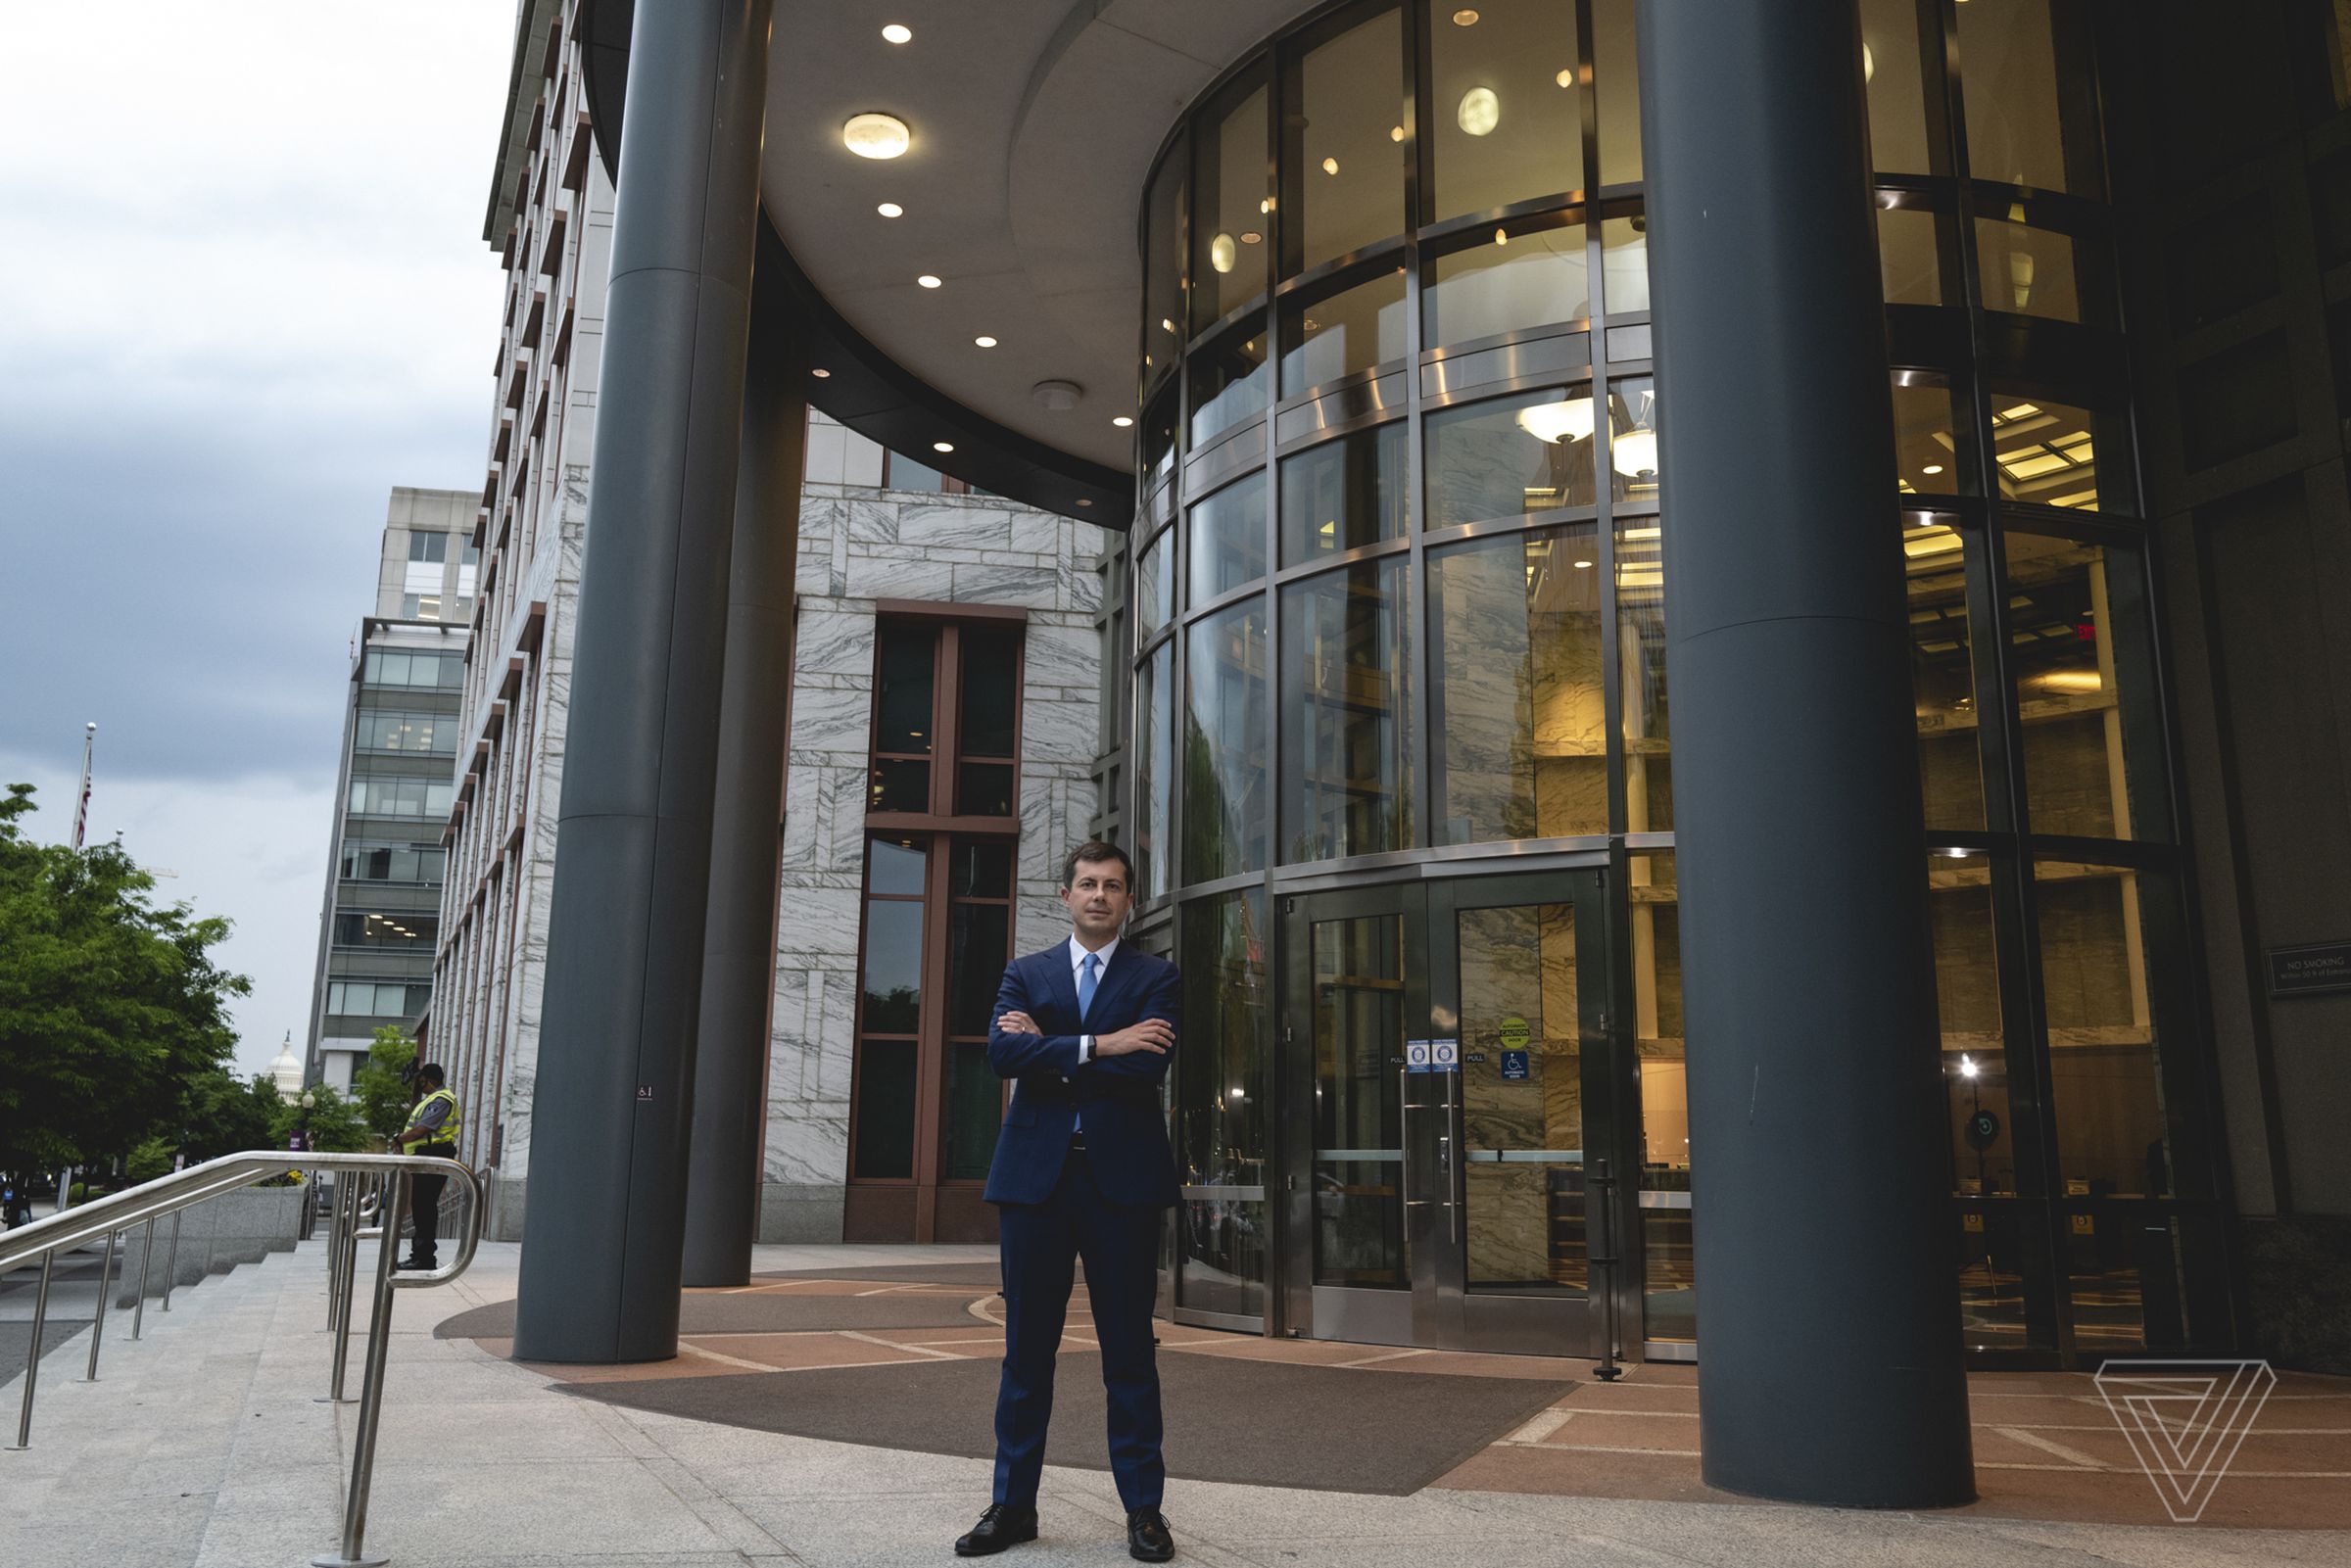 Secretary of Transportation Pete Buttigieg poses for a portrait at the Department of Transportation offices in Washington, DC.